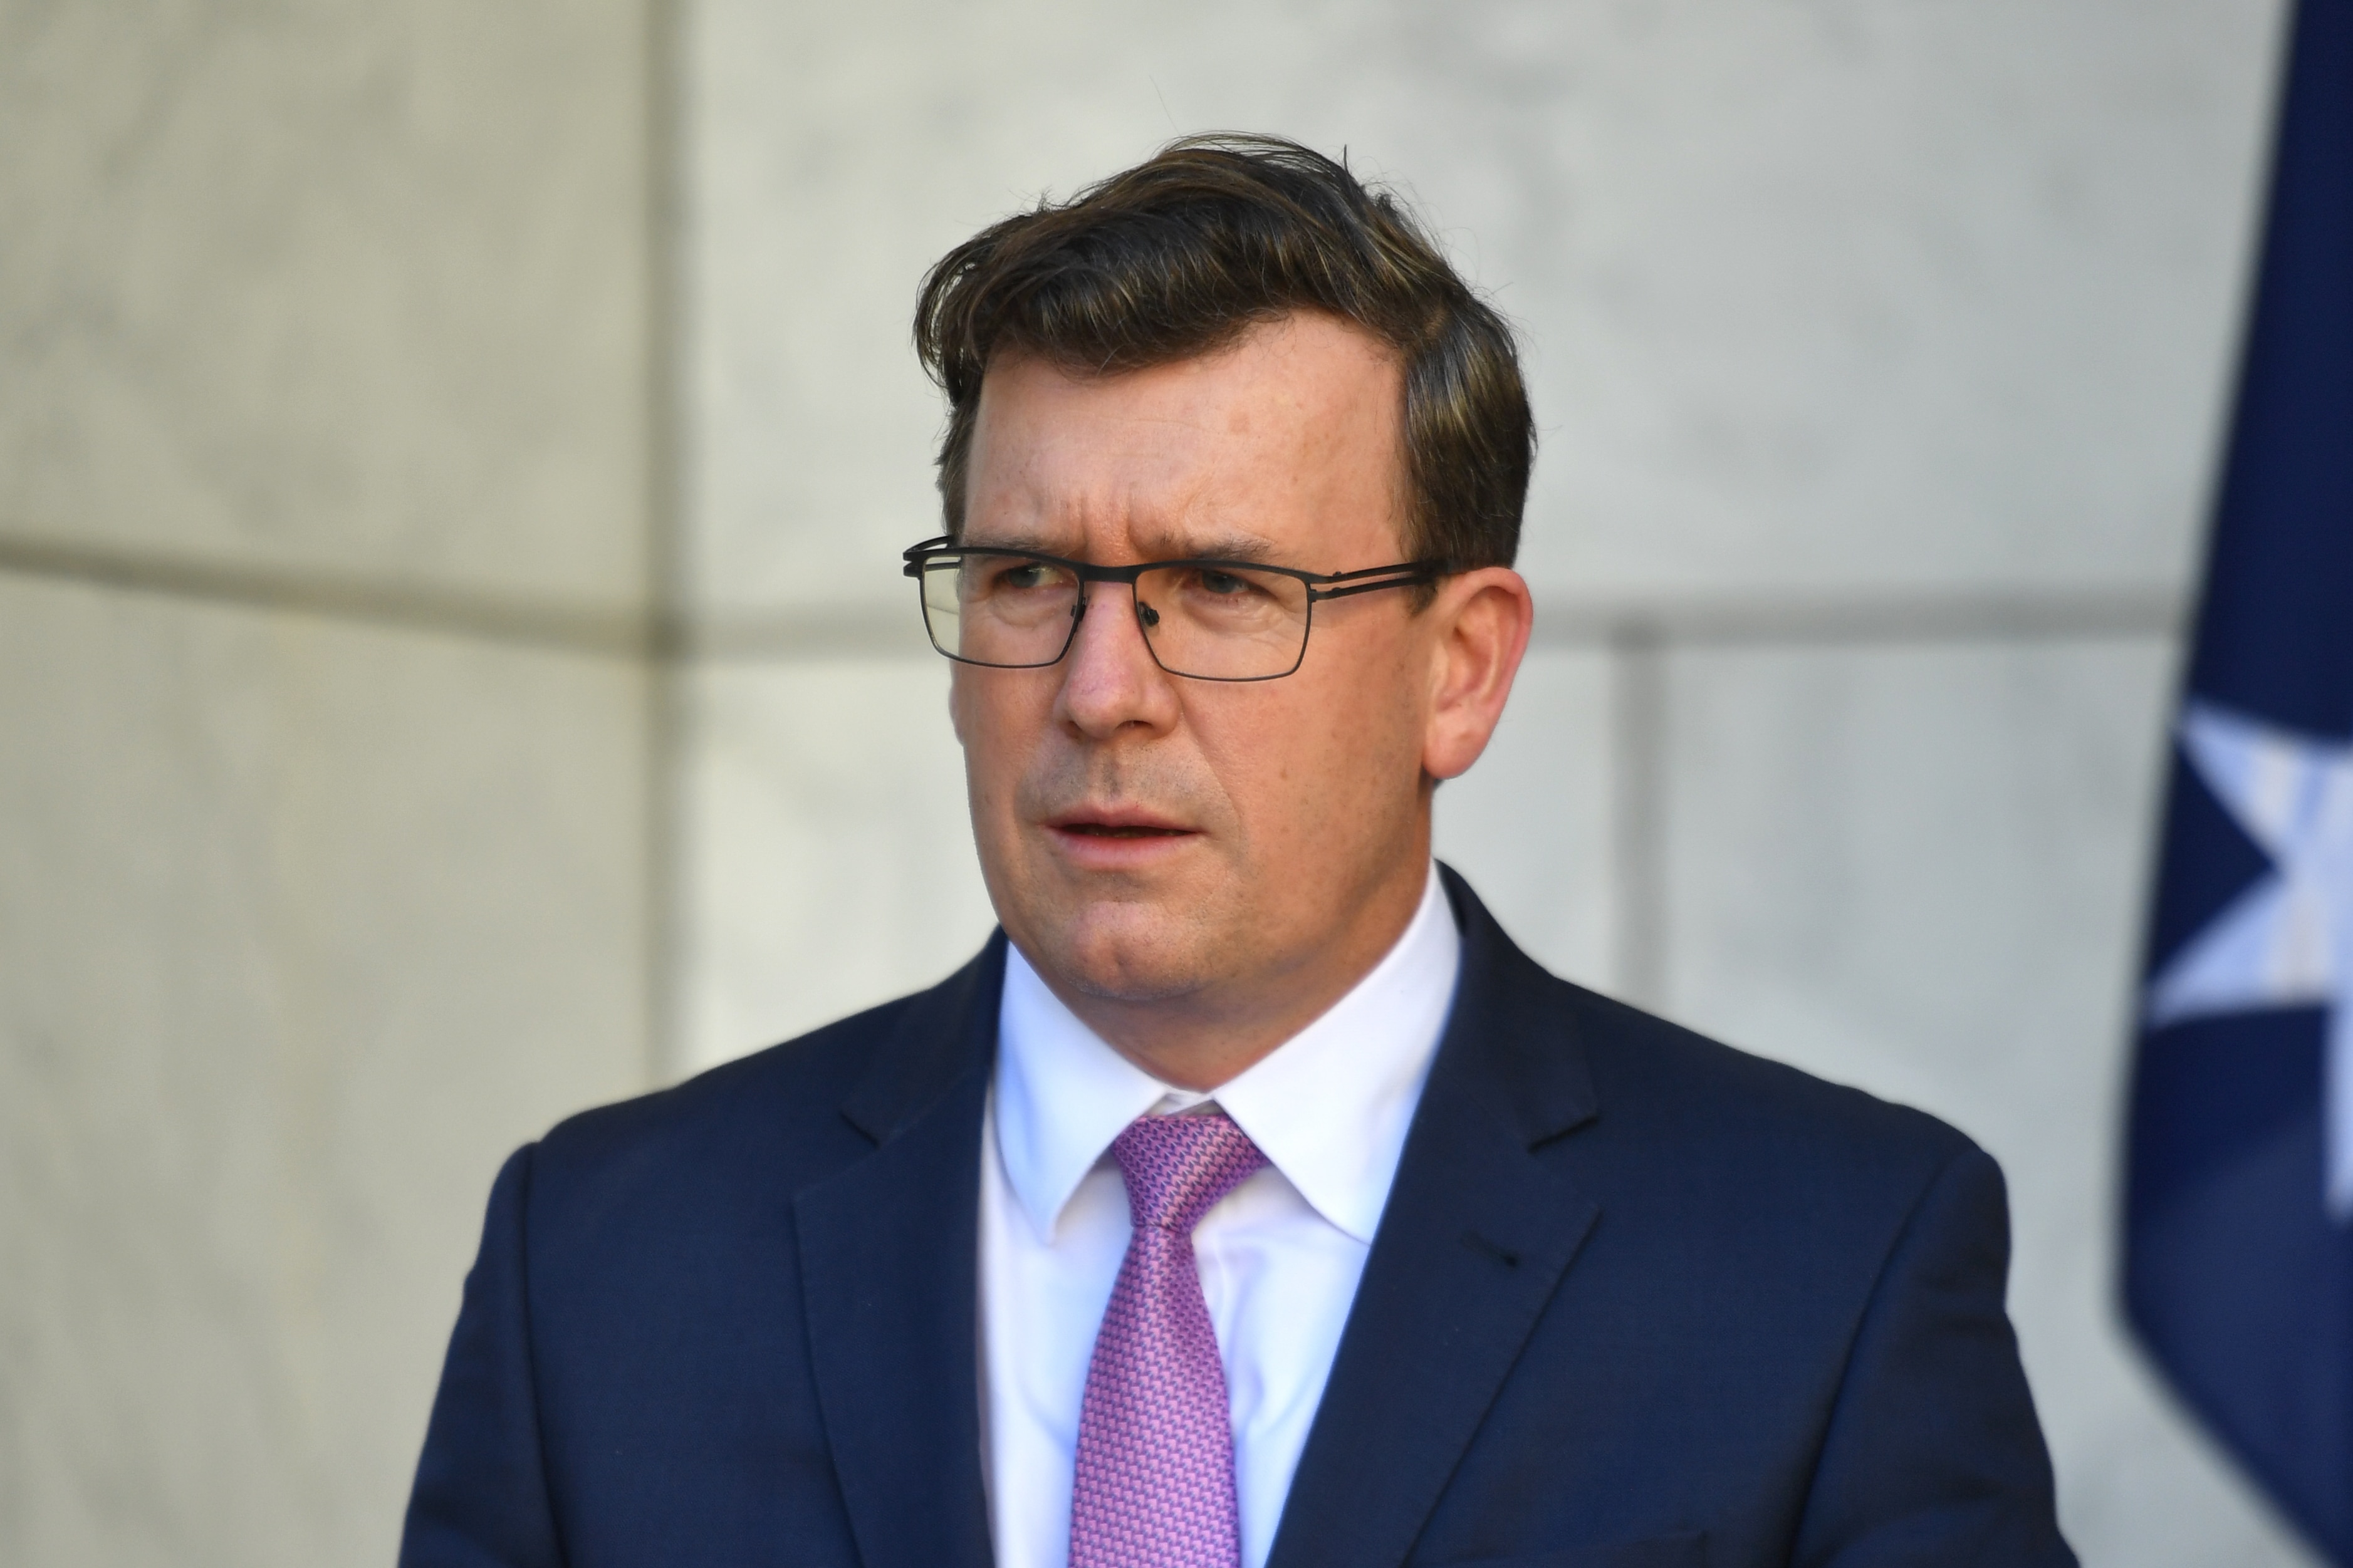 Acting Immigration Minster Alan Tudge at a press conference at Parliament House in Canberra.